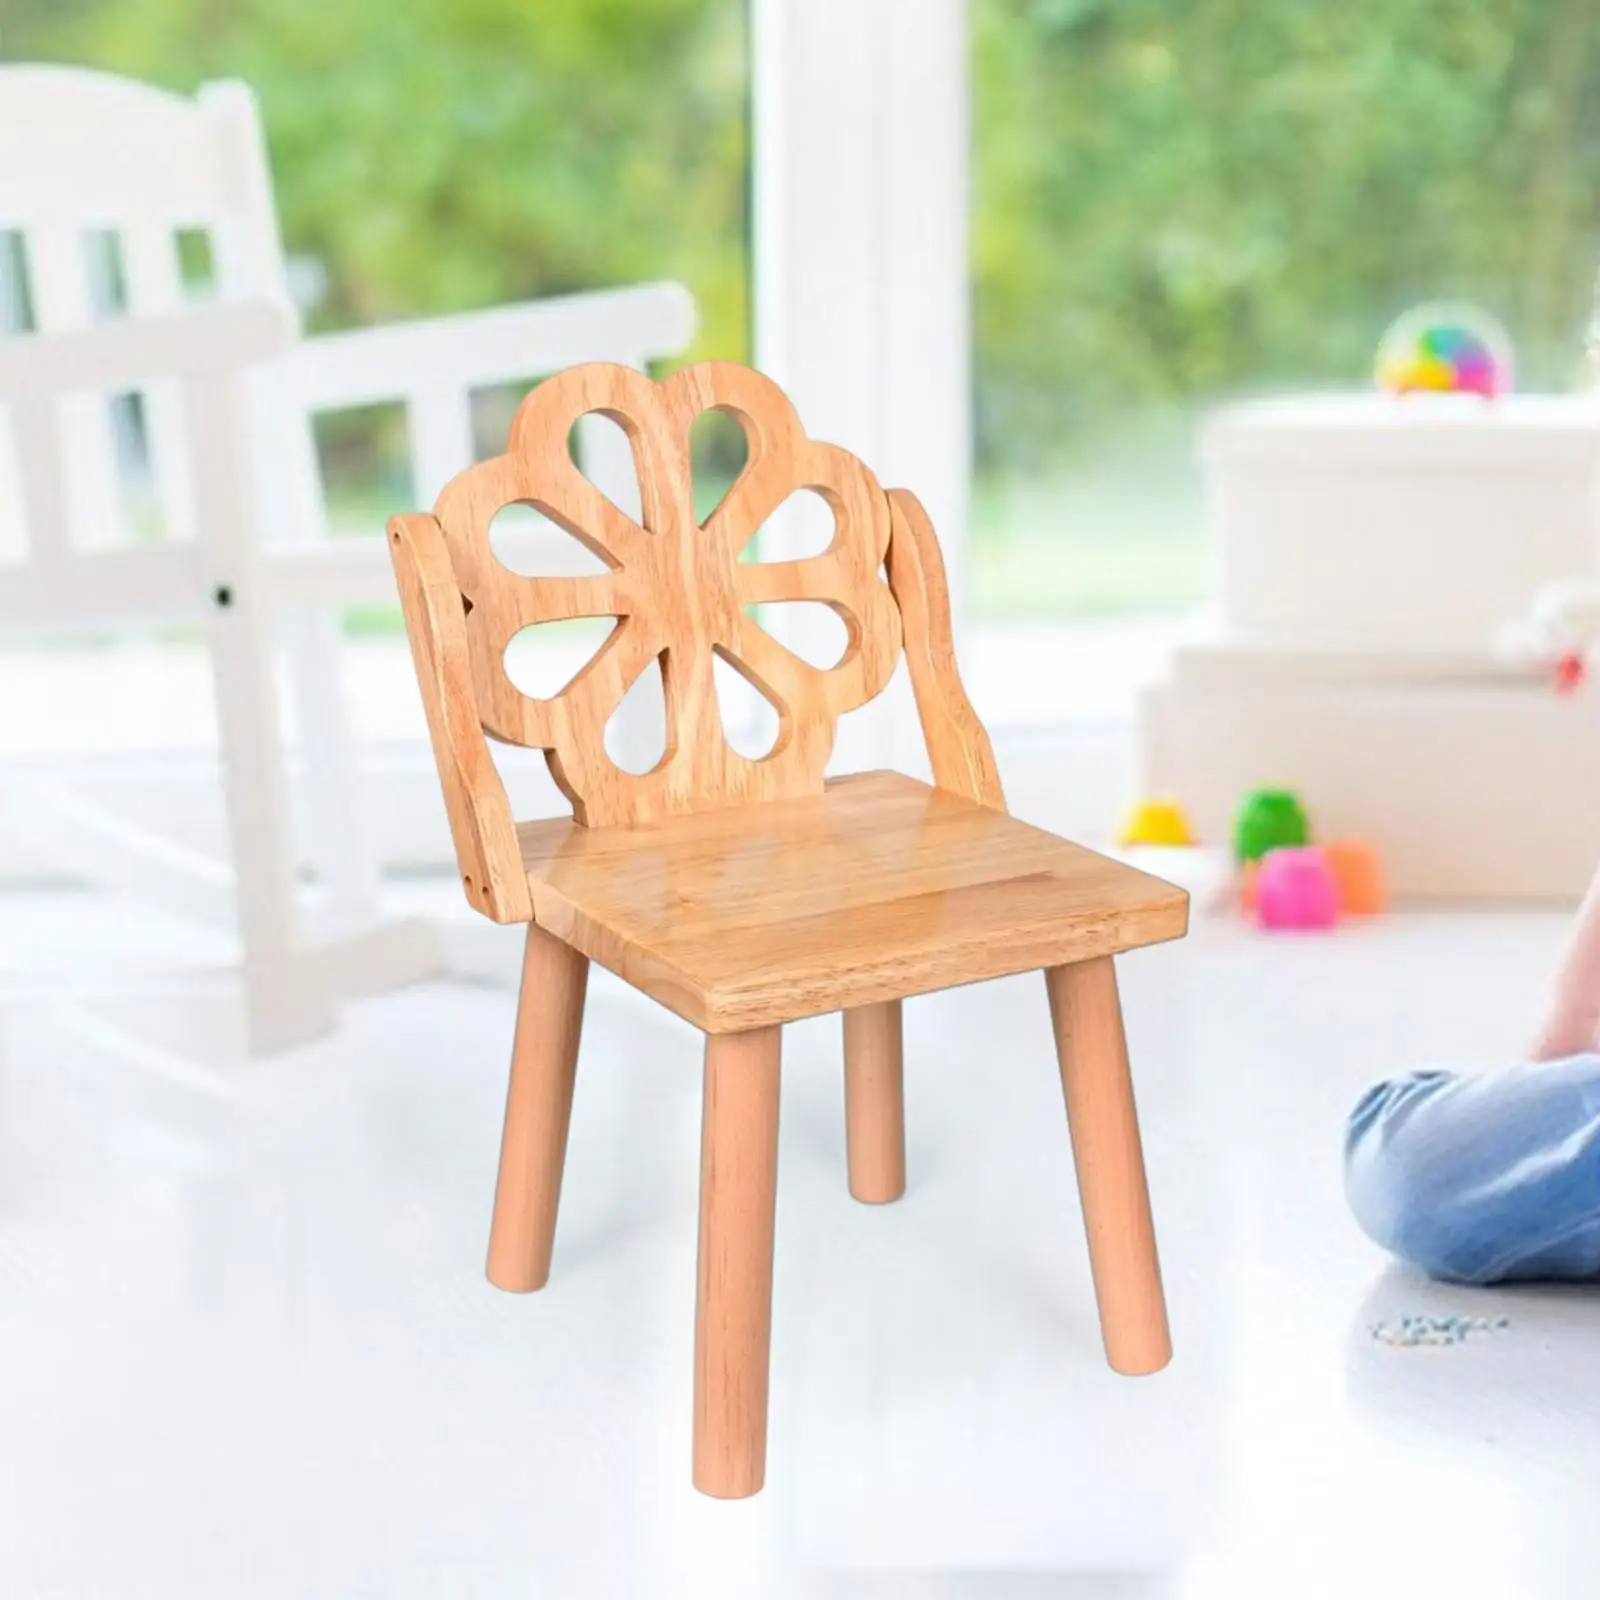 Removable Wooden Child Stool Wooden Toys for Children for Nursery School